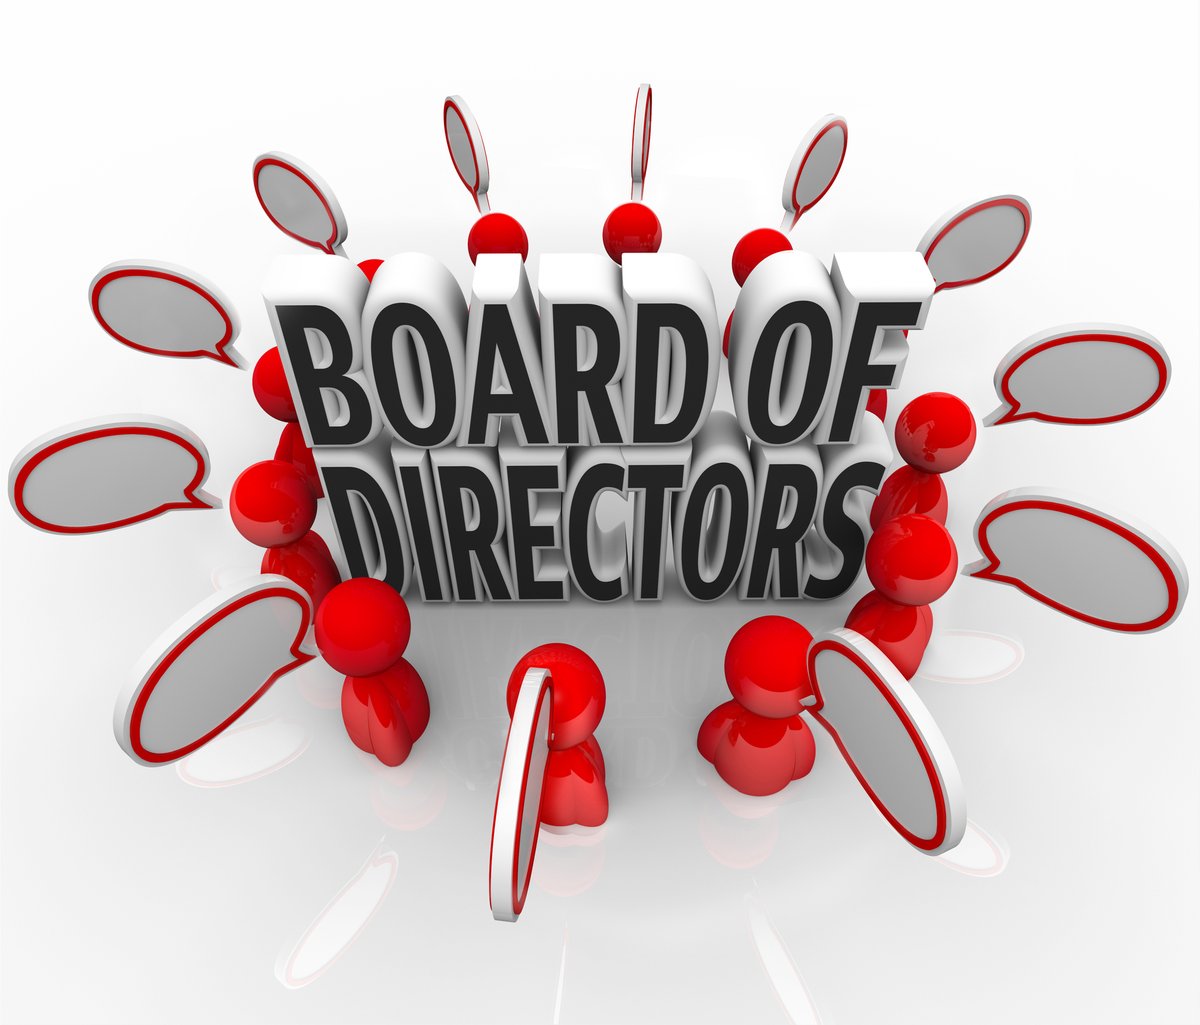 NANETS Board of Directors Nominations process closes 5/10. We welcome your nominations and you may self-nominate. See the instructions and nominate! loom.ly/1OqFL_I #NeuroendocrineCancers